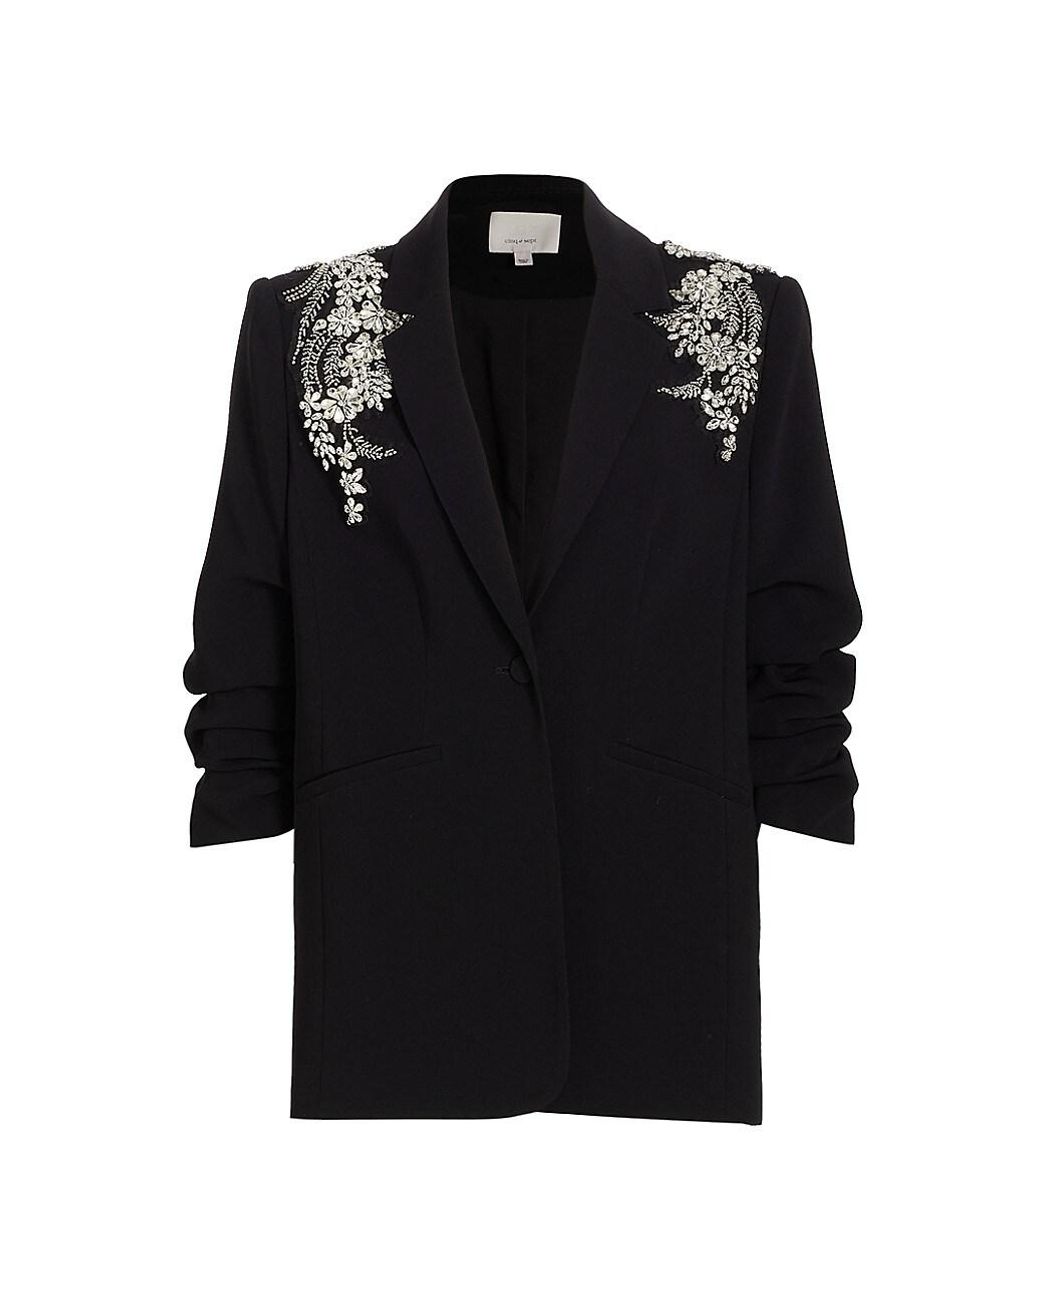 Cinq À Sept Synthetic Crystal Ivy Kylie Jacket in Black | Lyst